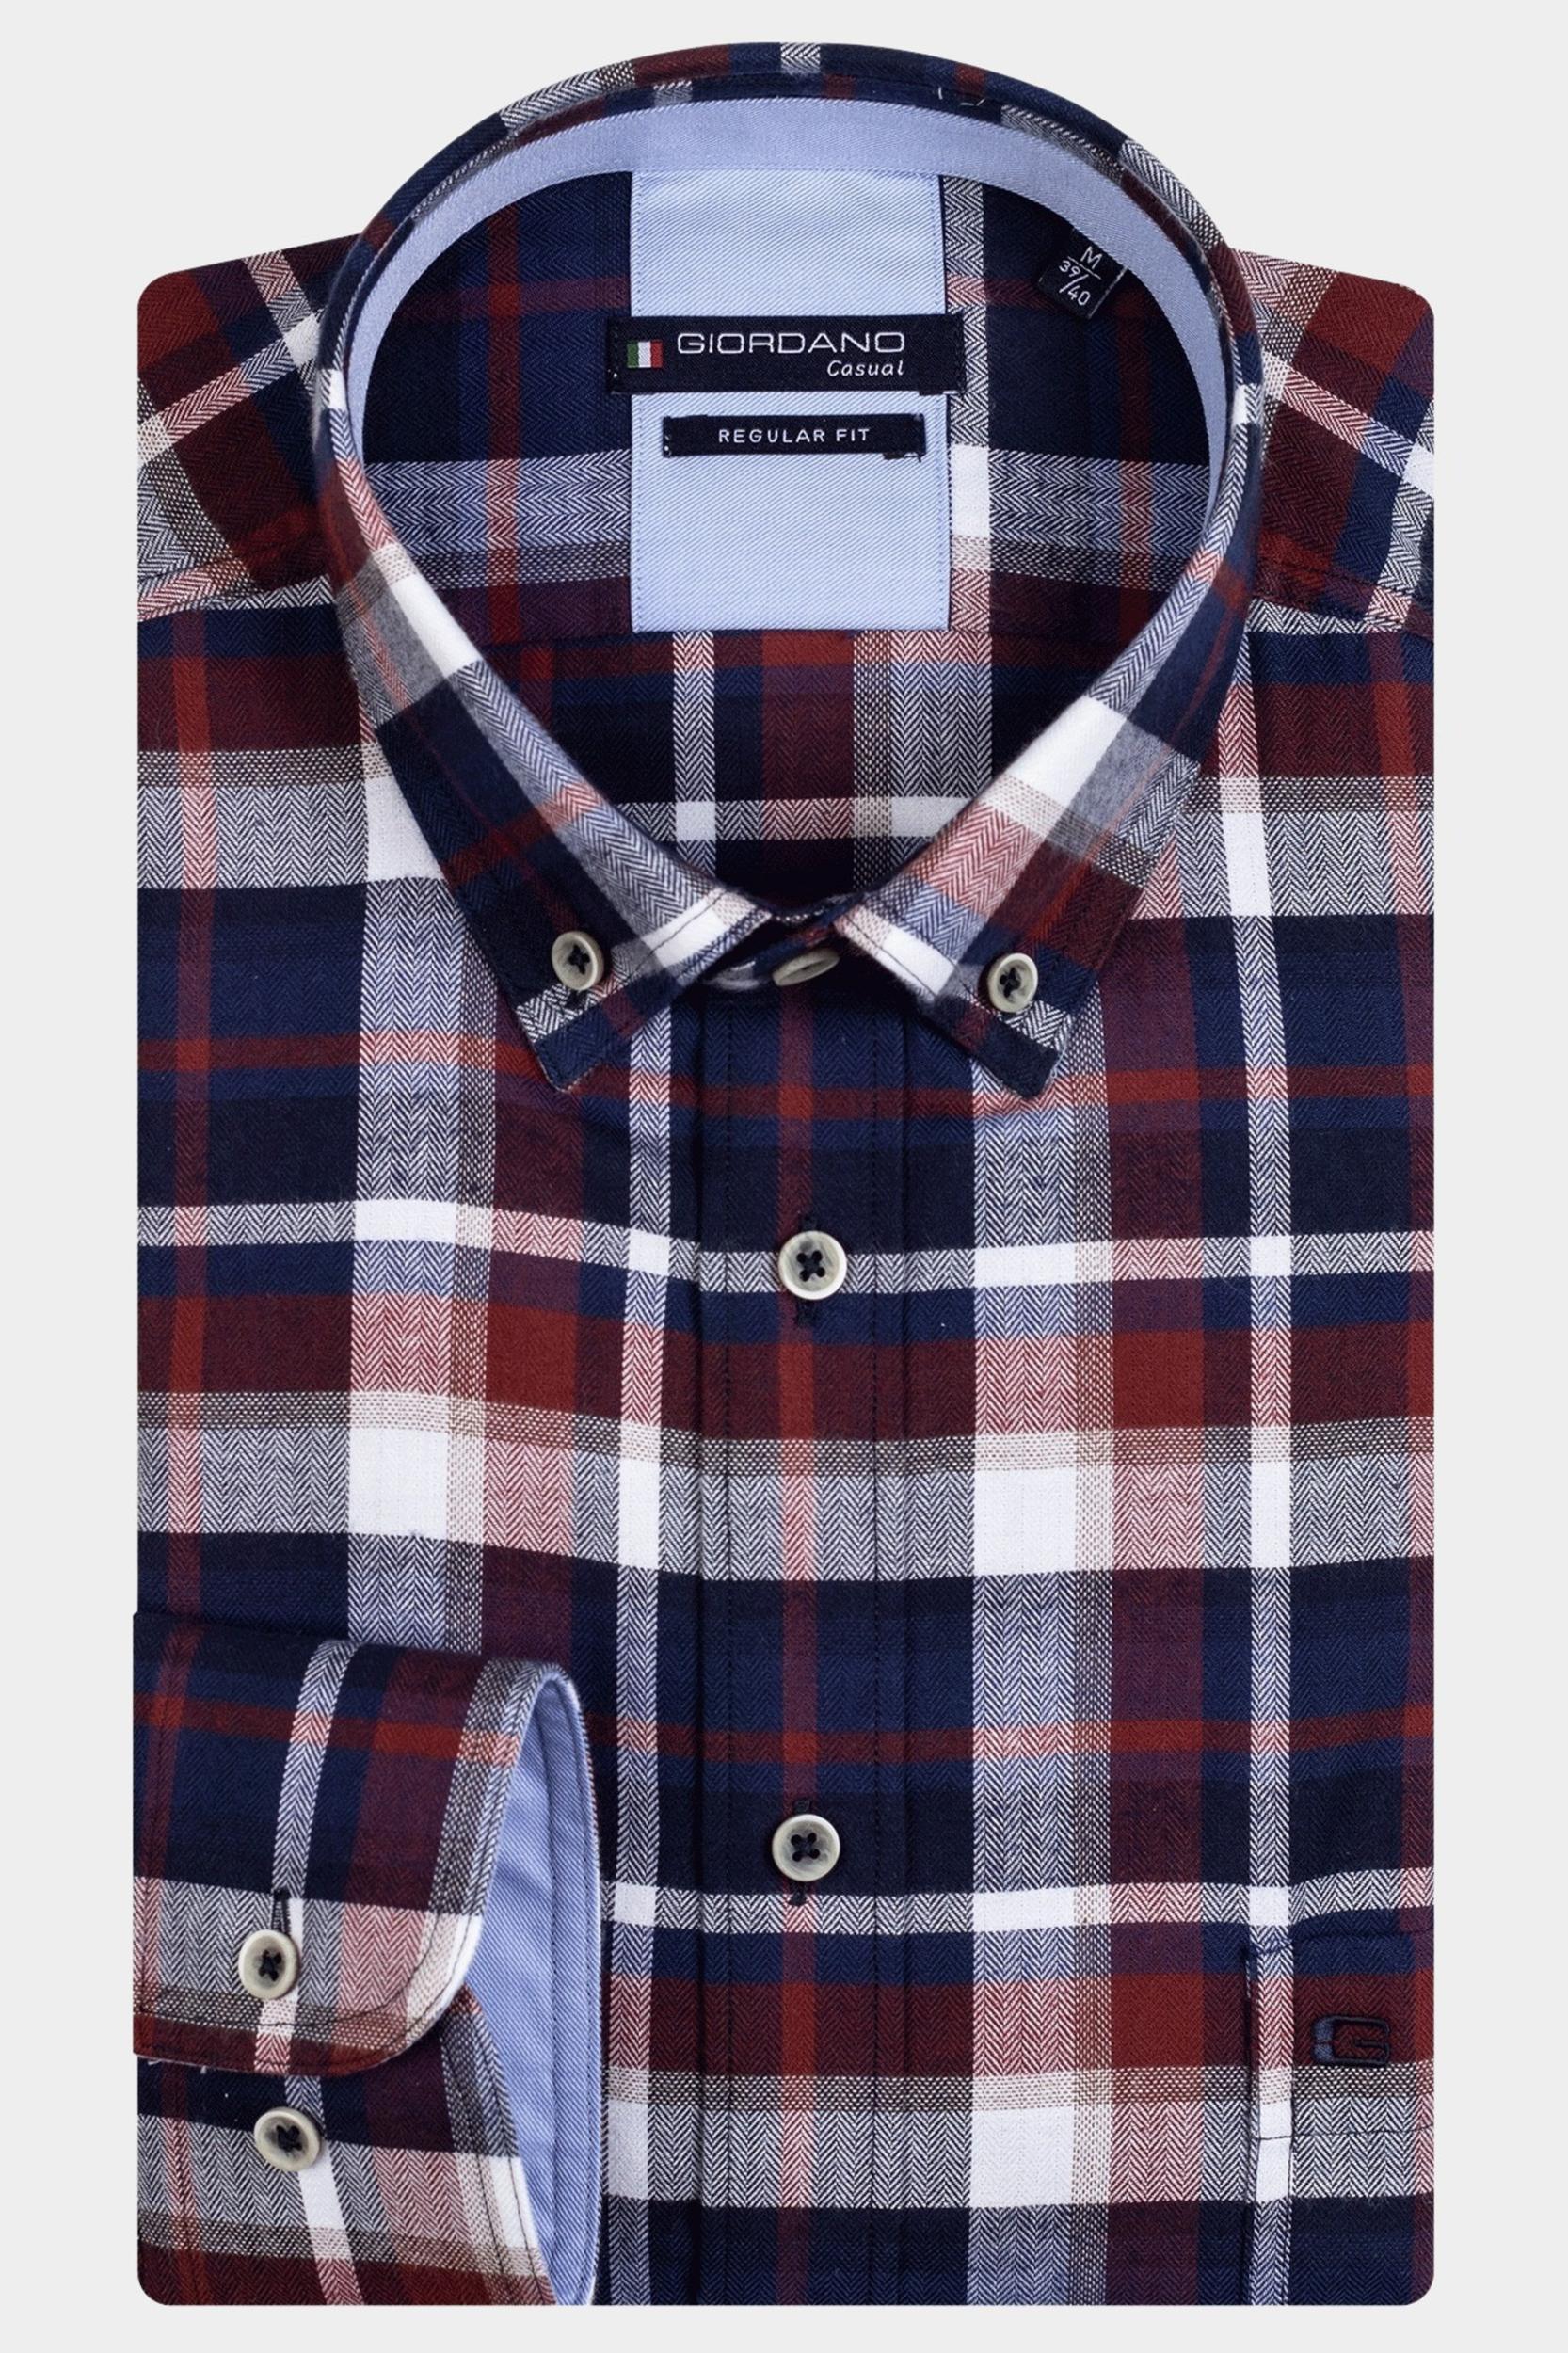 Giordano Casual hemd lange mouw Rood Ivy, LS Button Down 327304/30